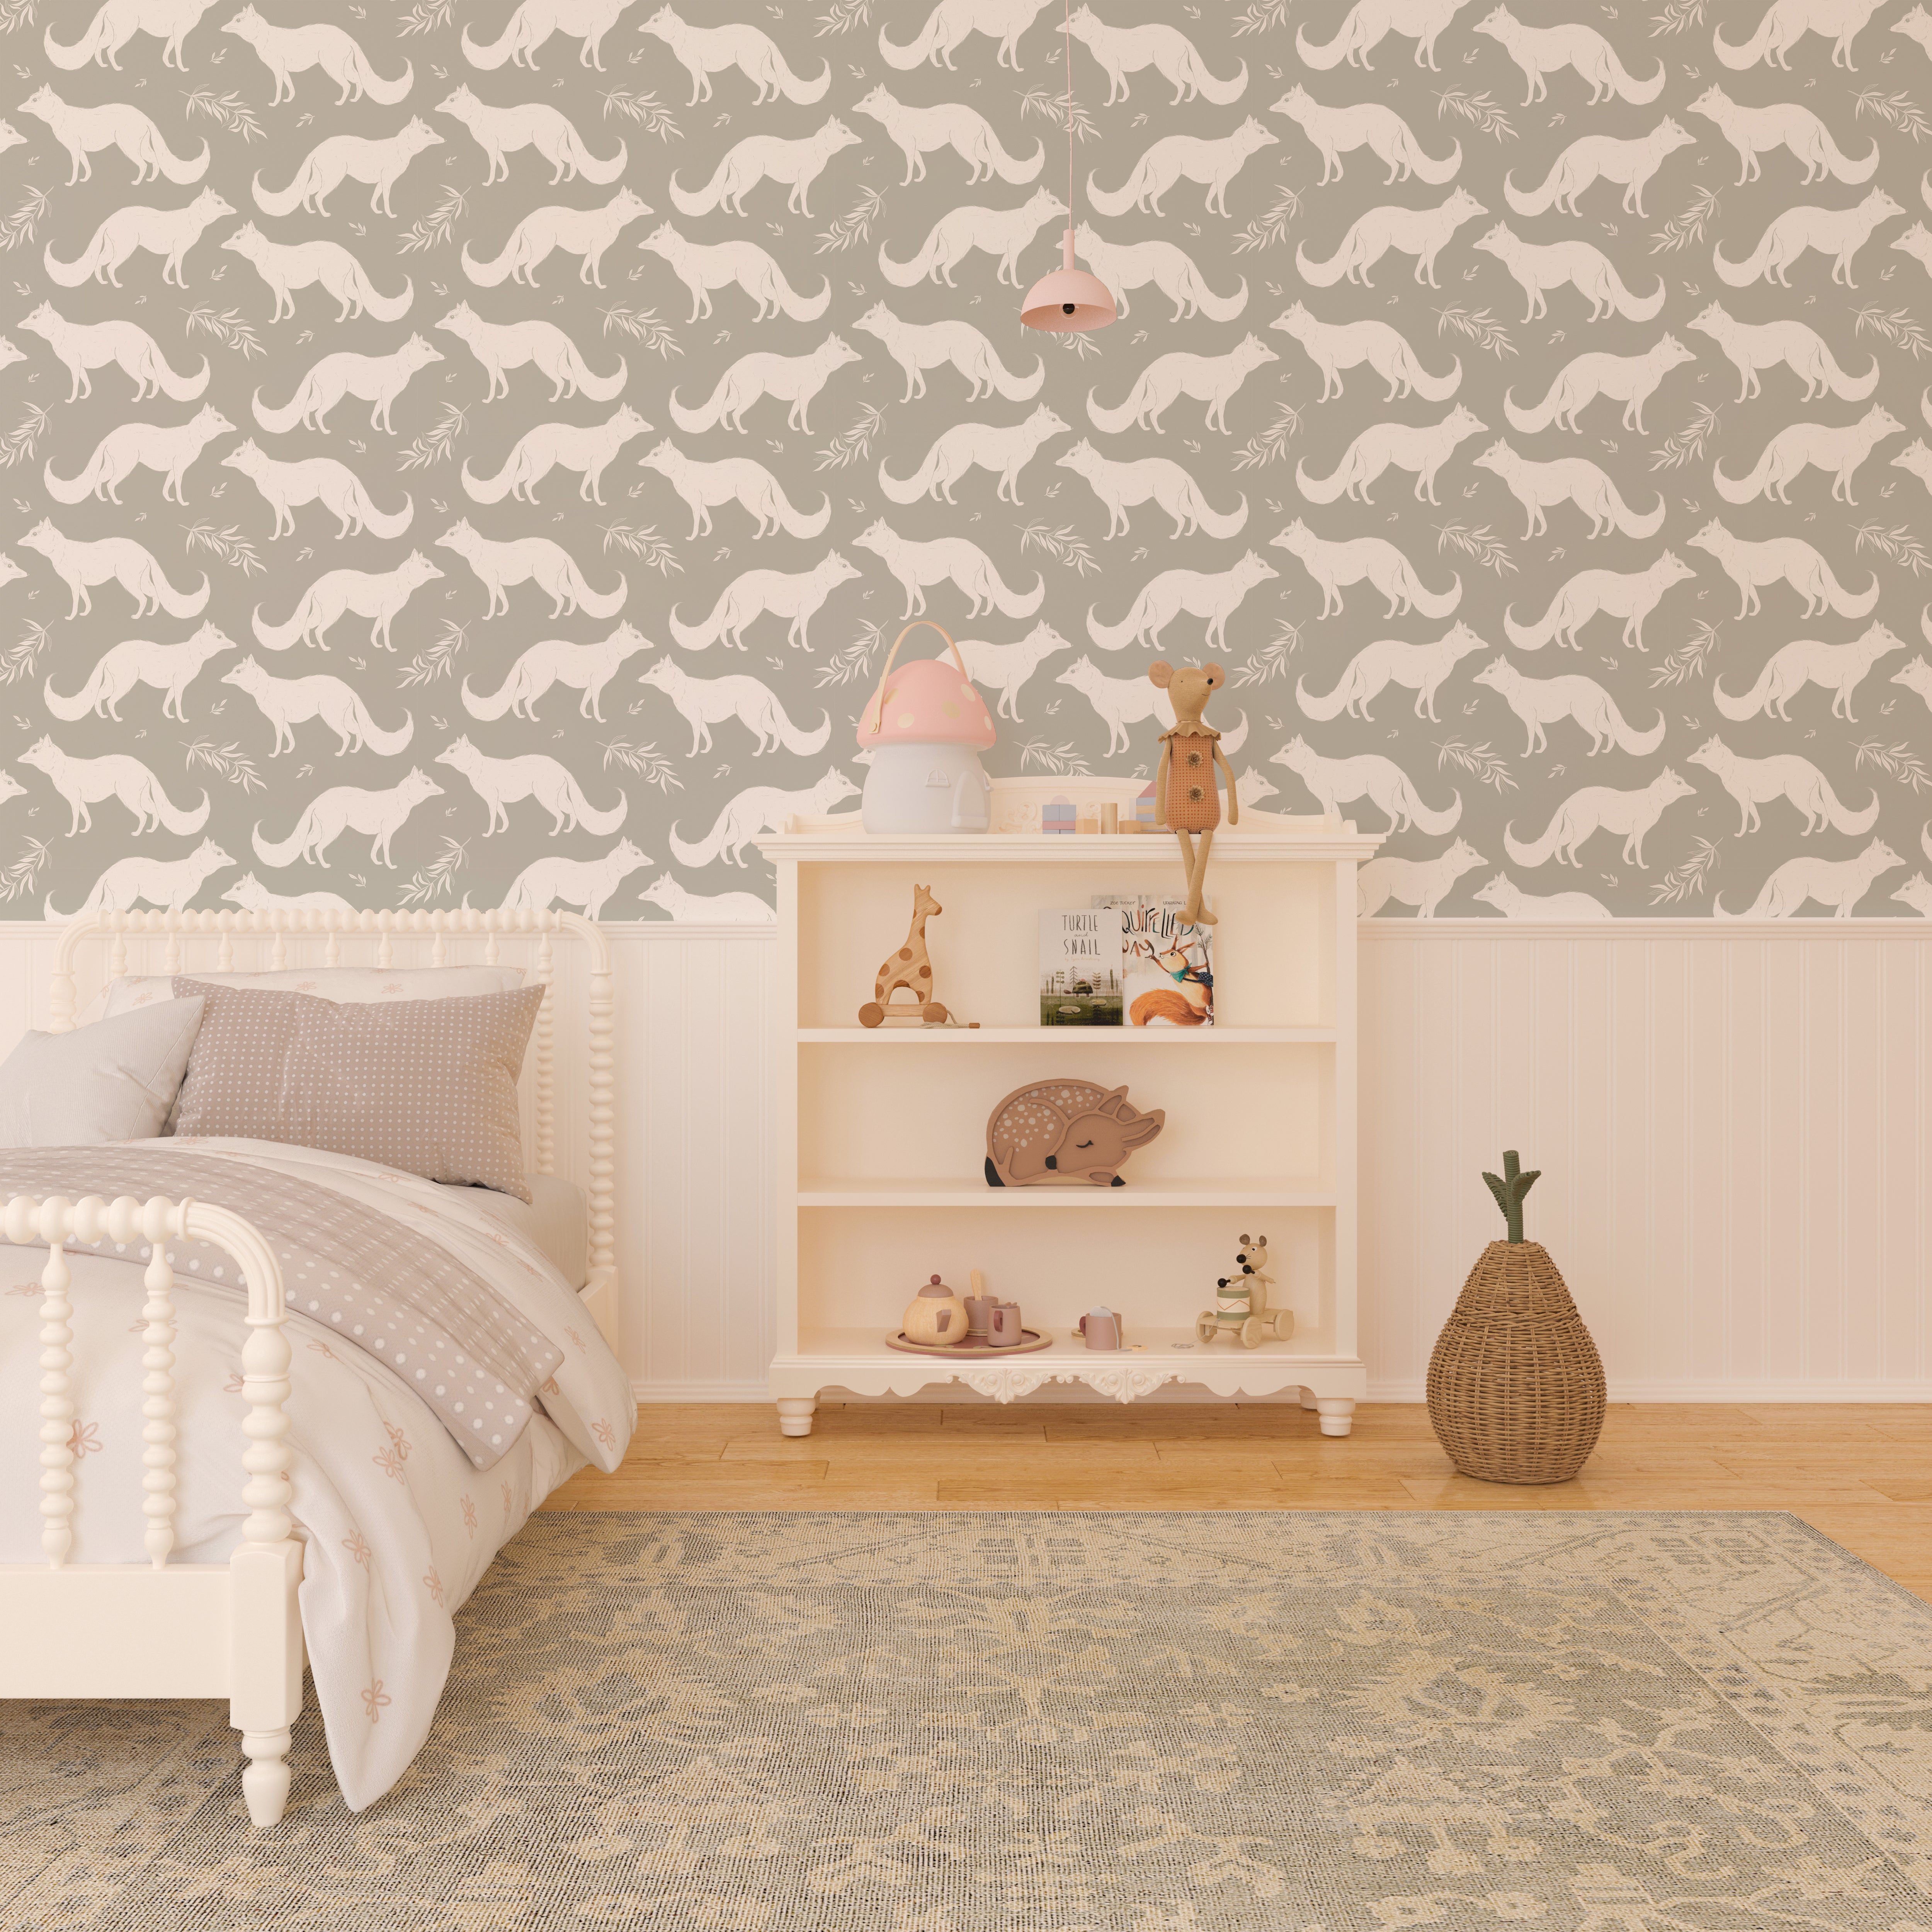 A children's room with a bed and a shelf full of toys against a muted green wallpaper featuring white foxes and delicate foliage patterns, creating a whimsical and peaceful atmosphere